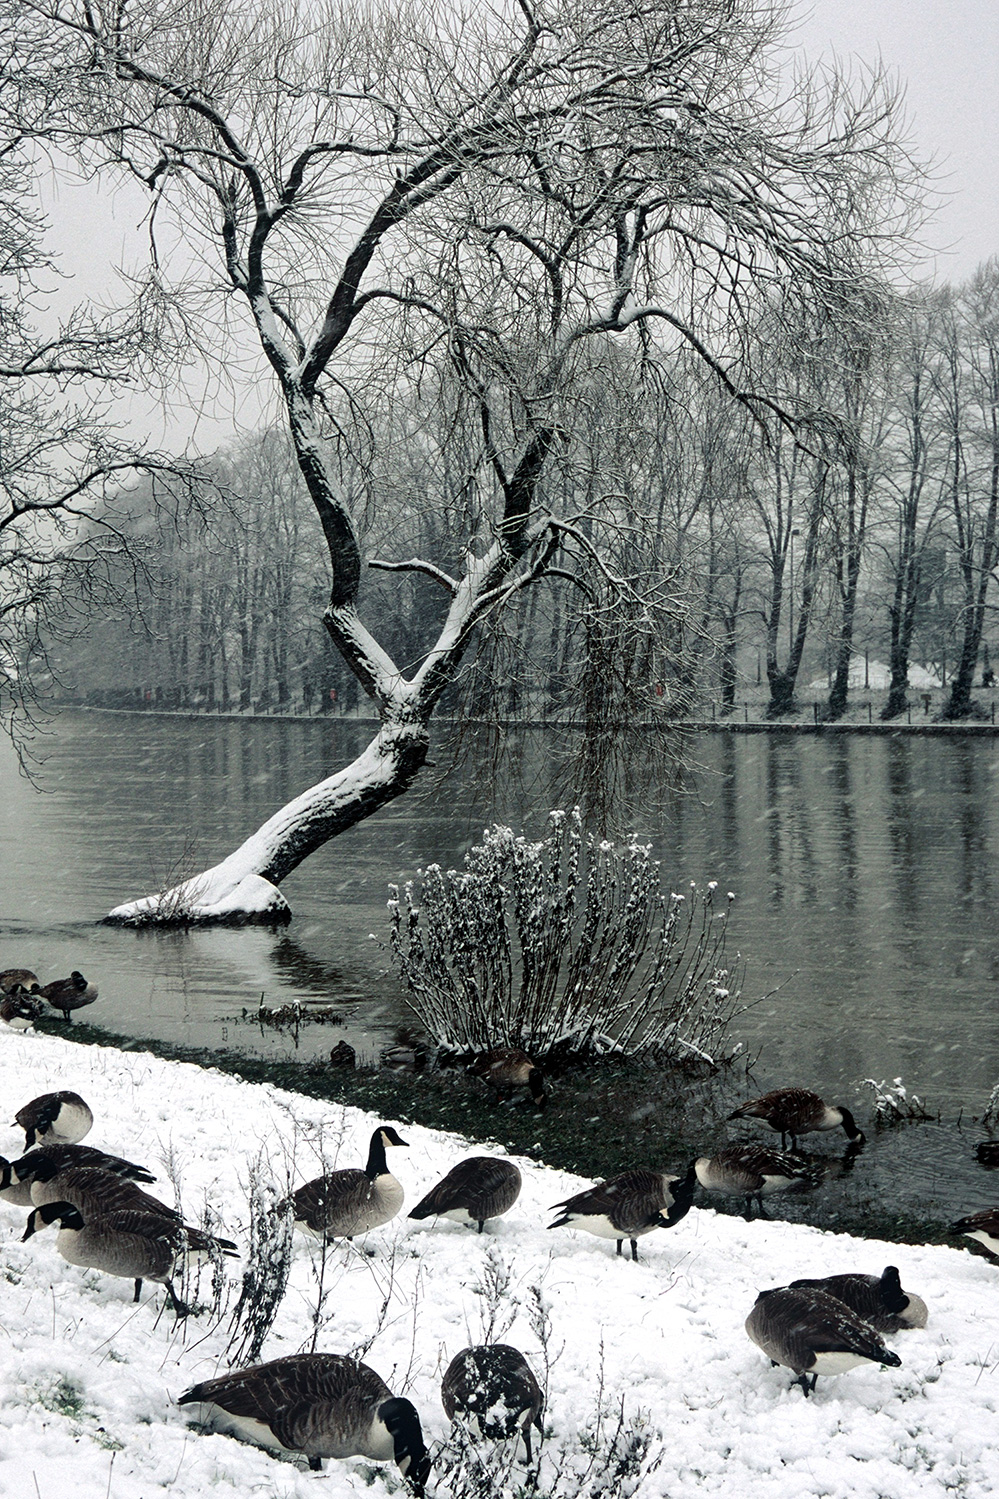 Winter Winter by the Thames, Molesey, Surrey